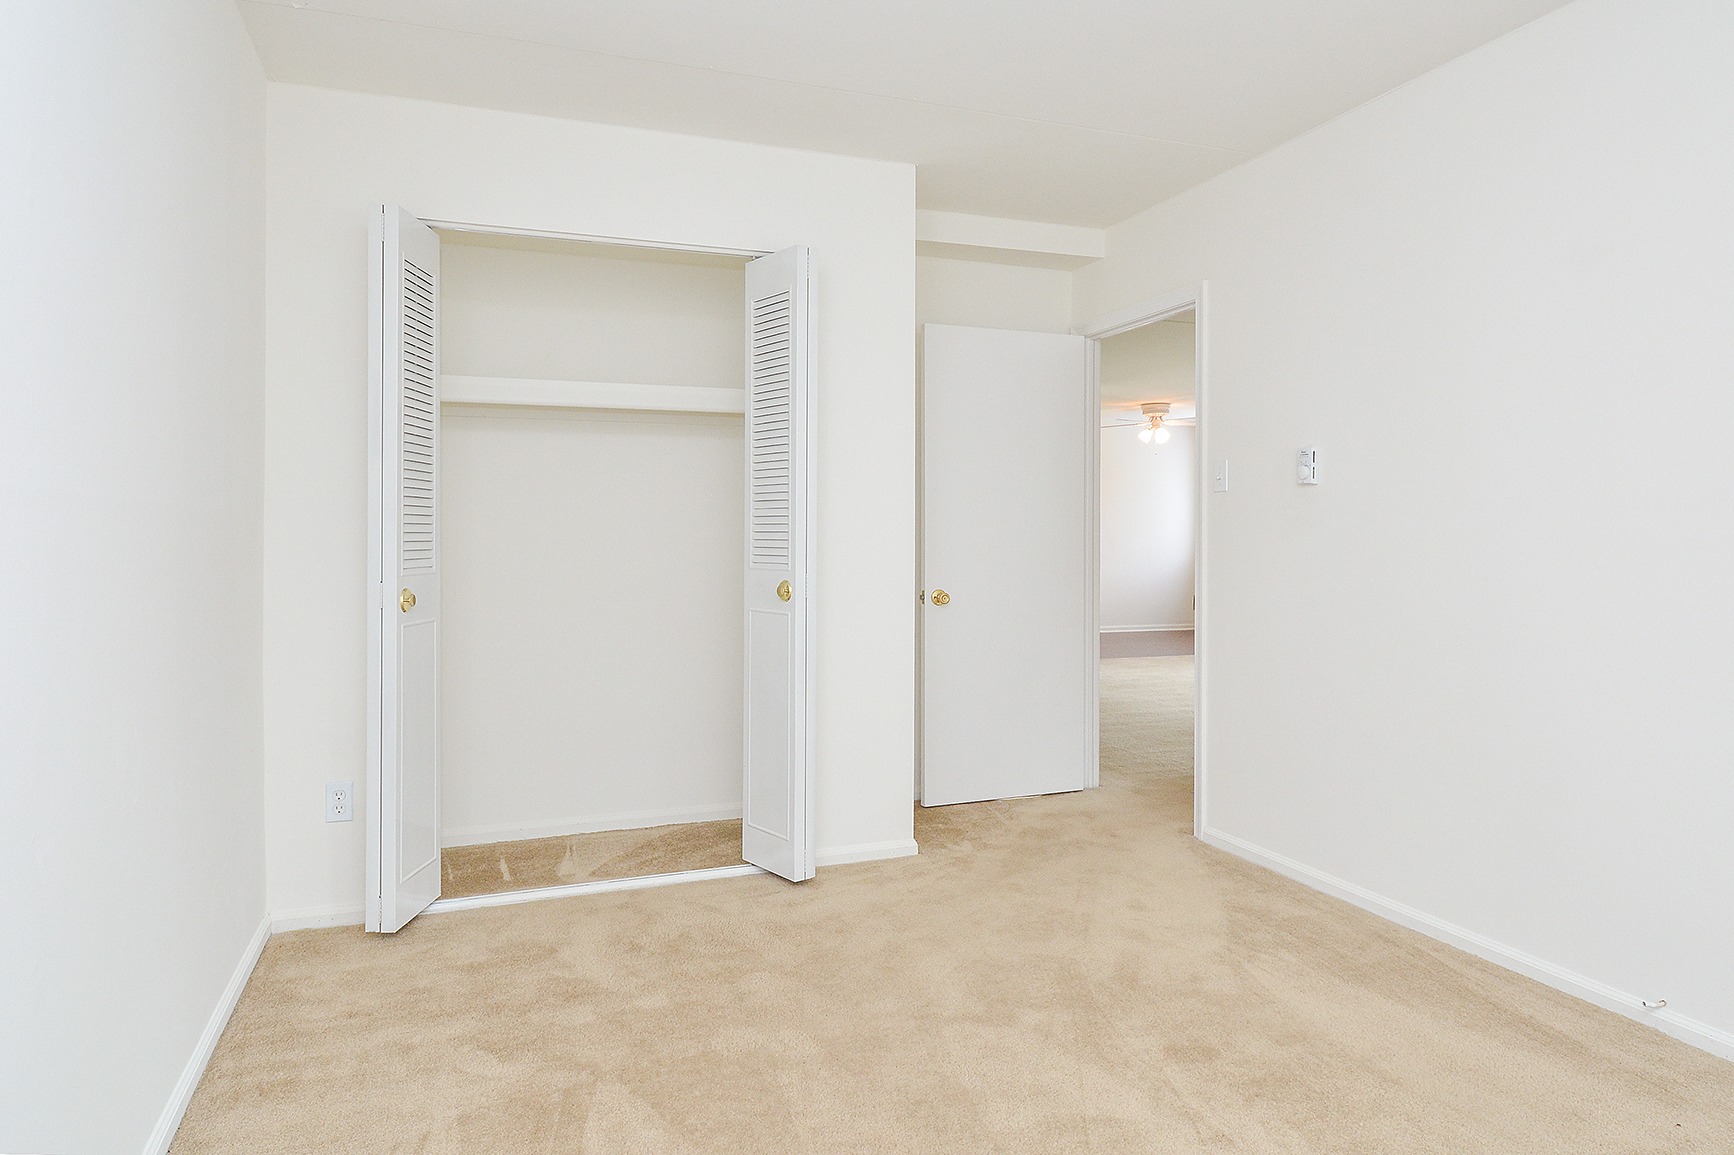 Carpeted bedroom with a closet in an apartment at Gulph Mills Village.